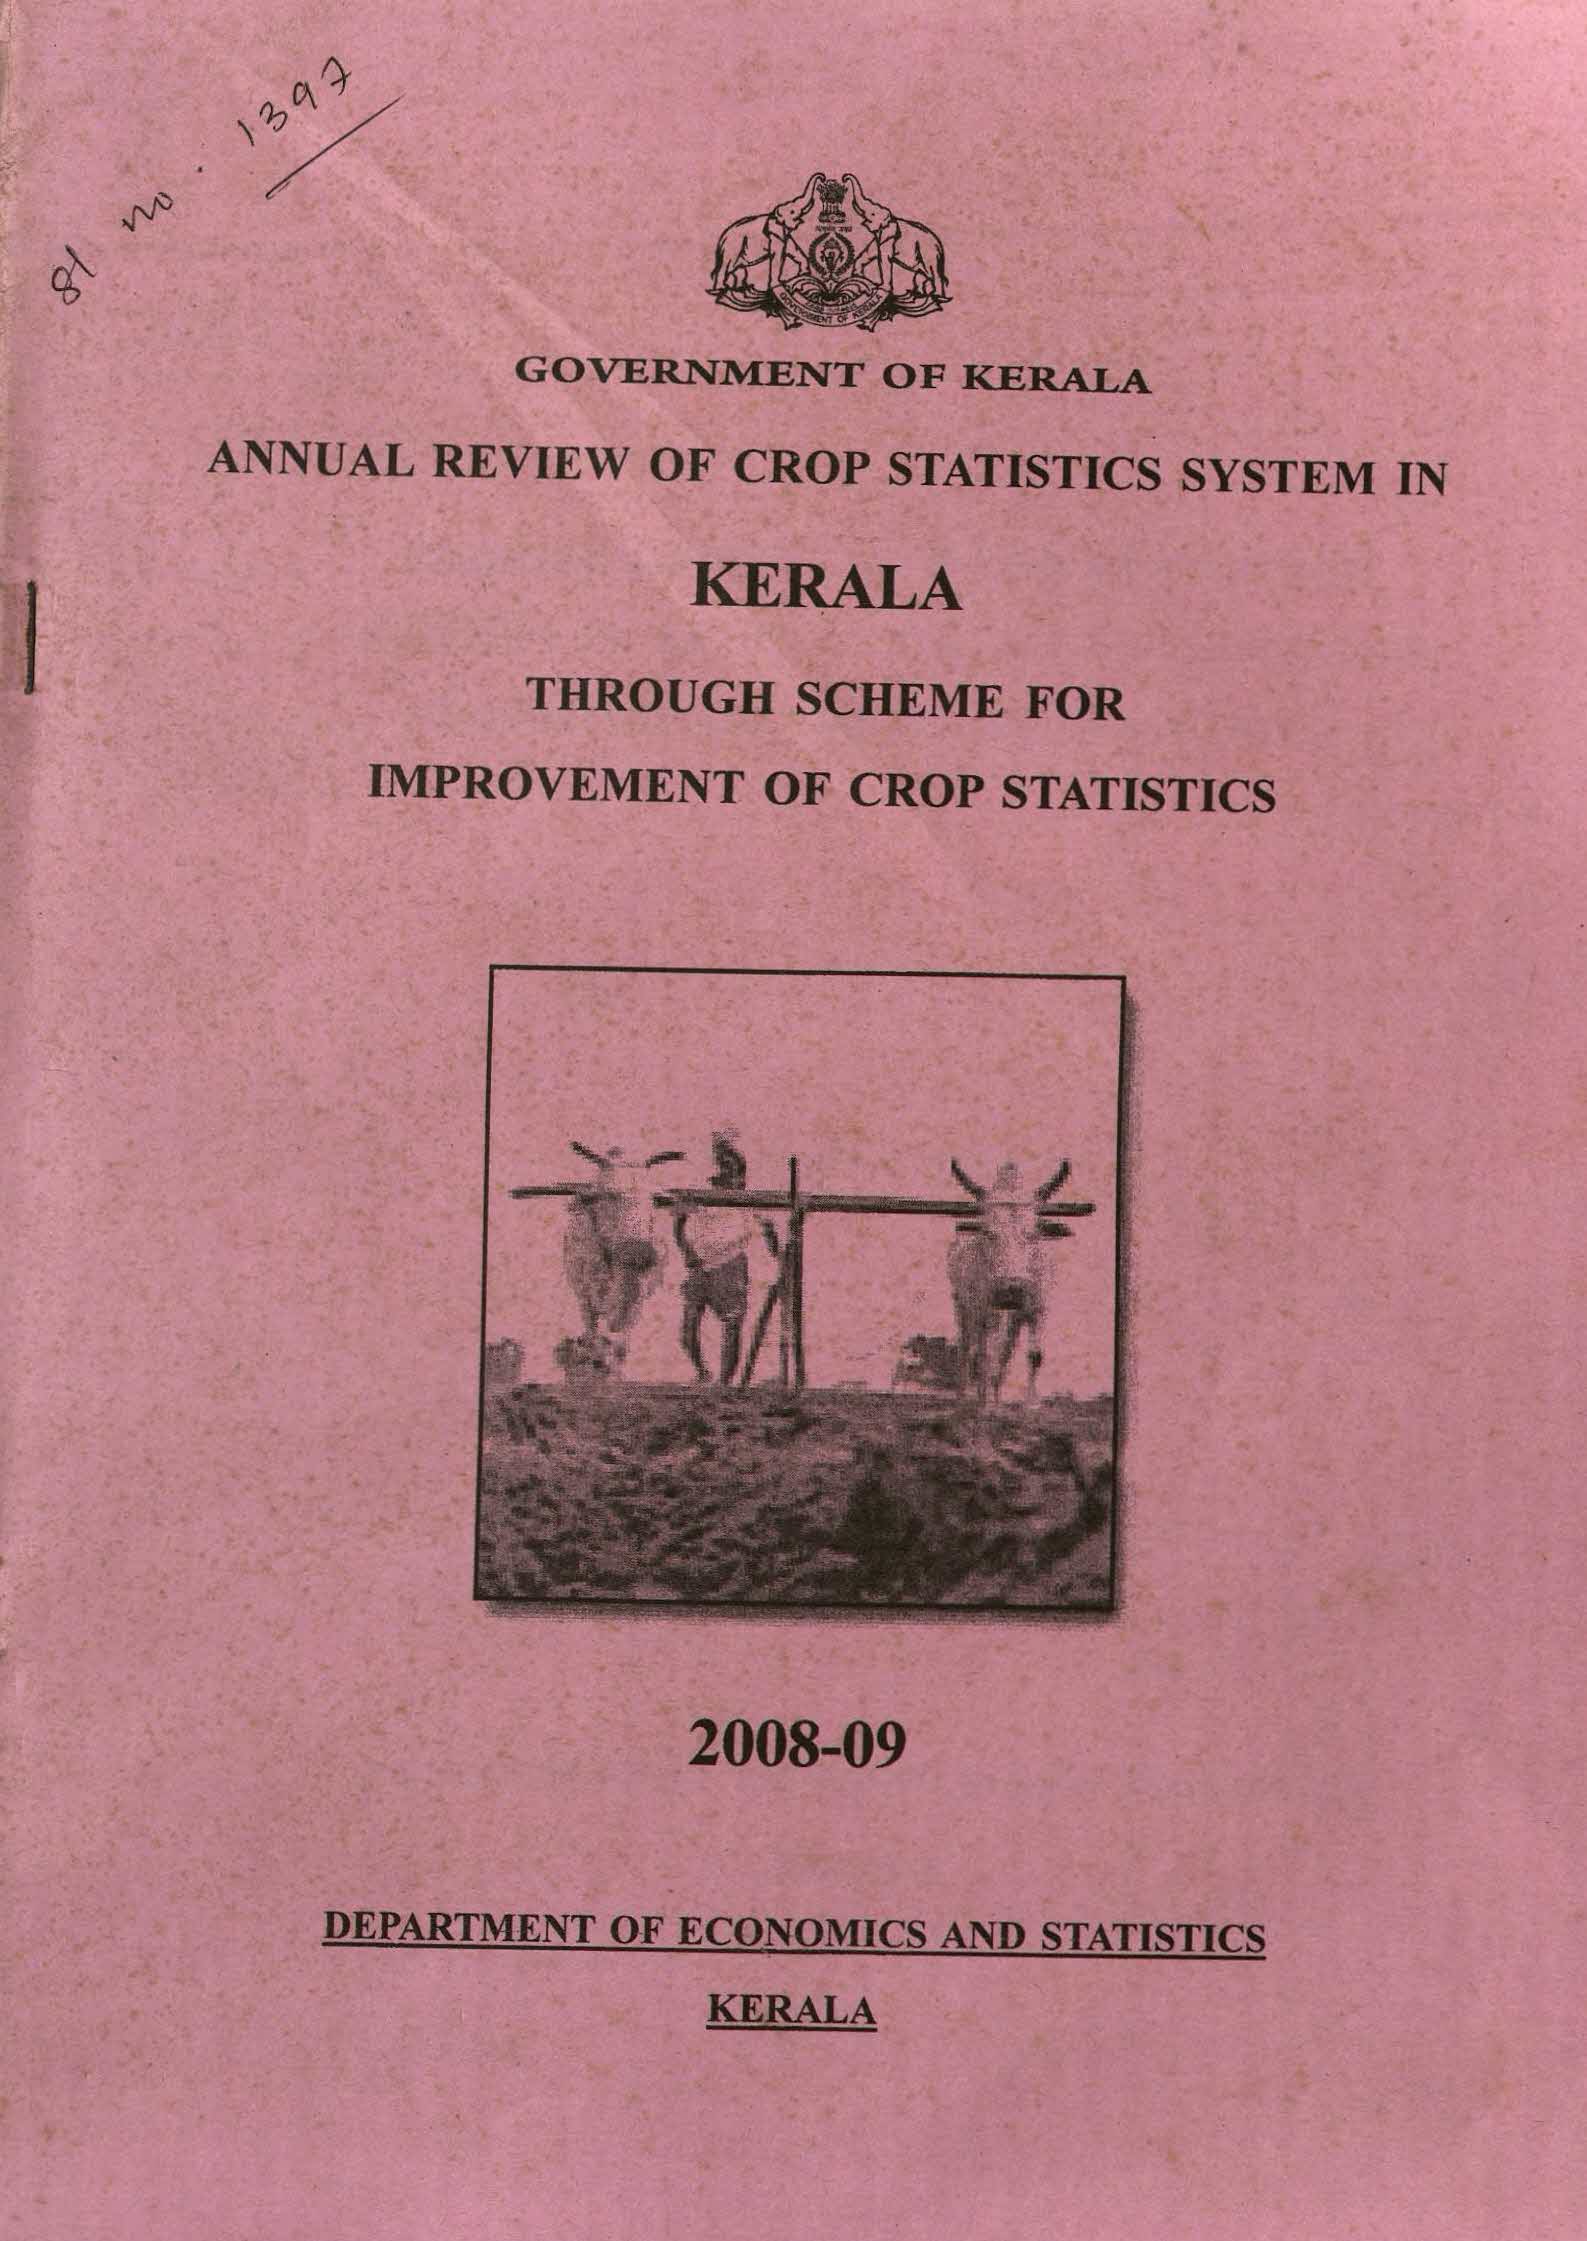 ANNUAL REVIEW OF CROP STATISTICS SYSTEM IN KERALA 2008-09